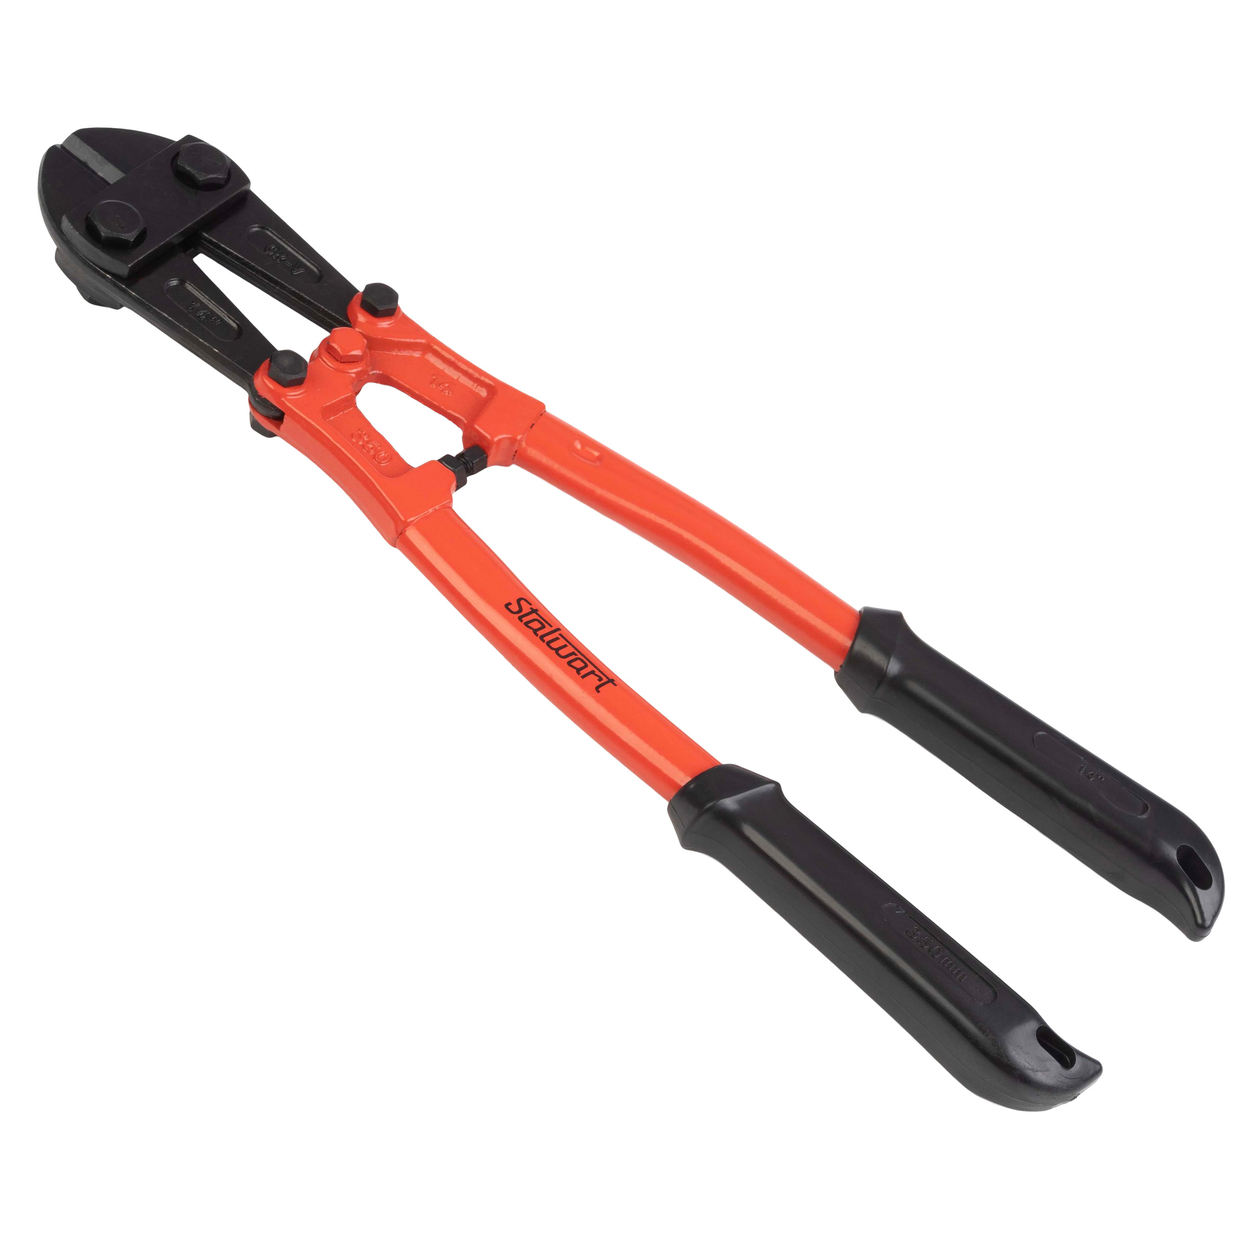 Bolt Cutter Drop Forged Alloy Steel Ergonomic Grips Cuts Chains - 14inch